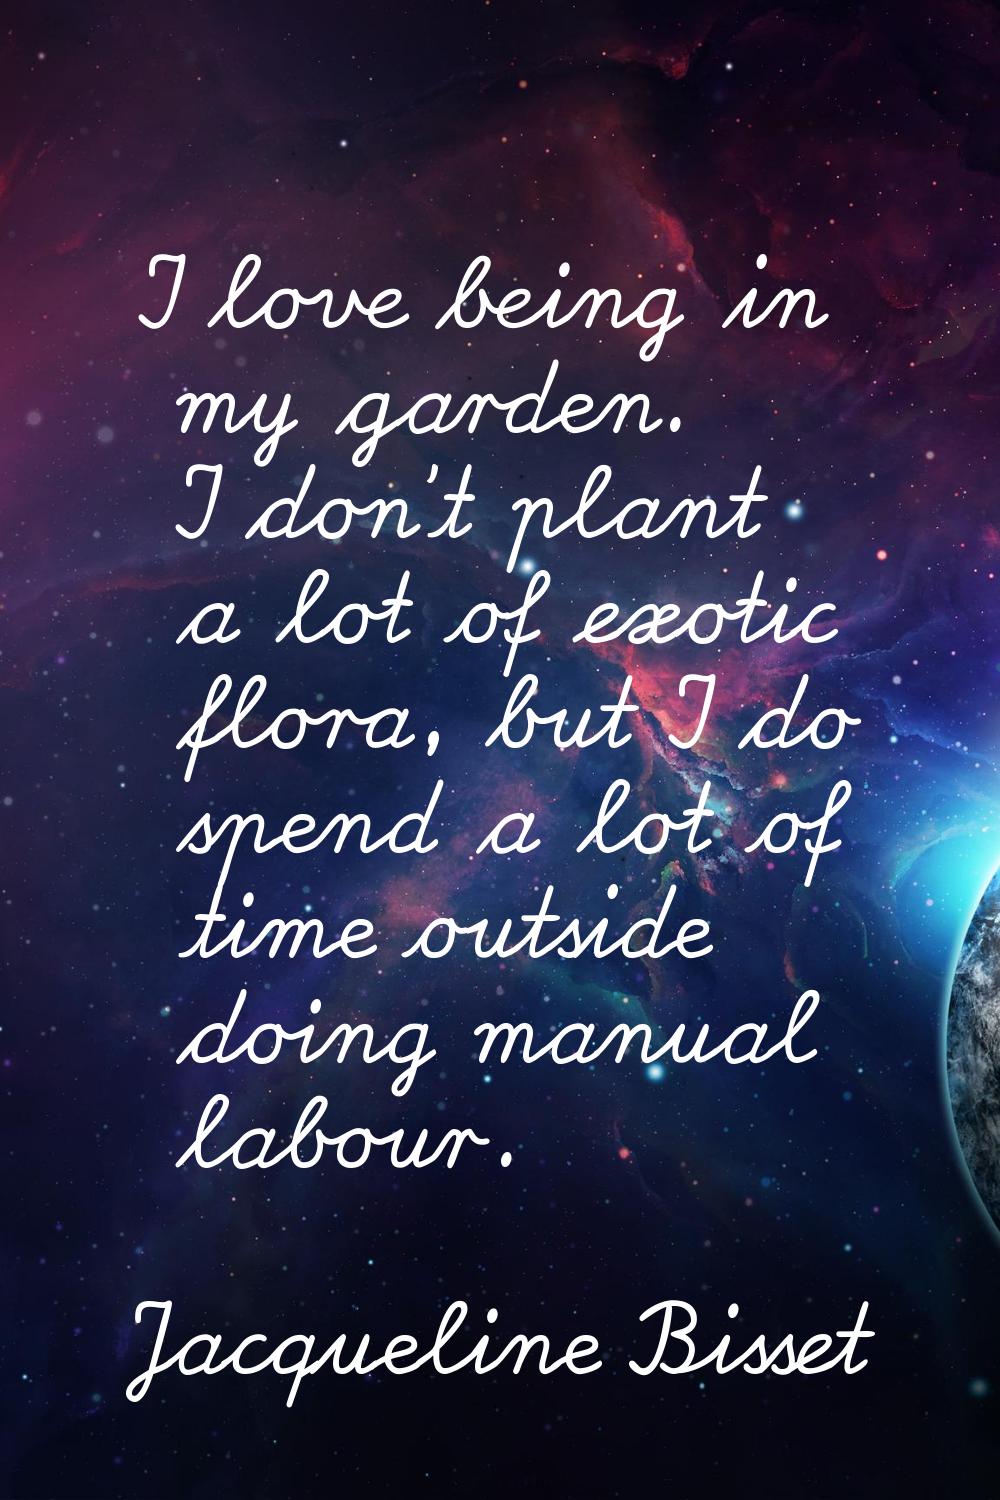 I love being in my garden. I don't plant a lot of exotic flora, but I do spend a lot of time outsid